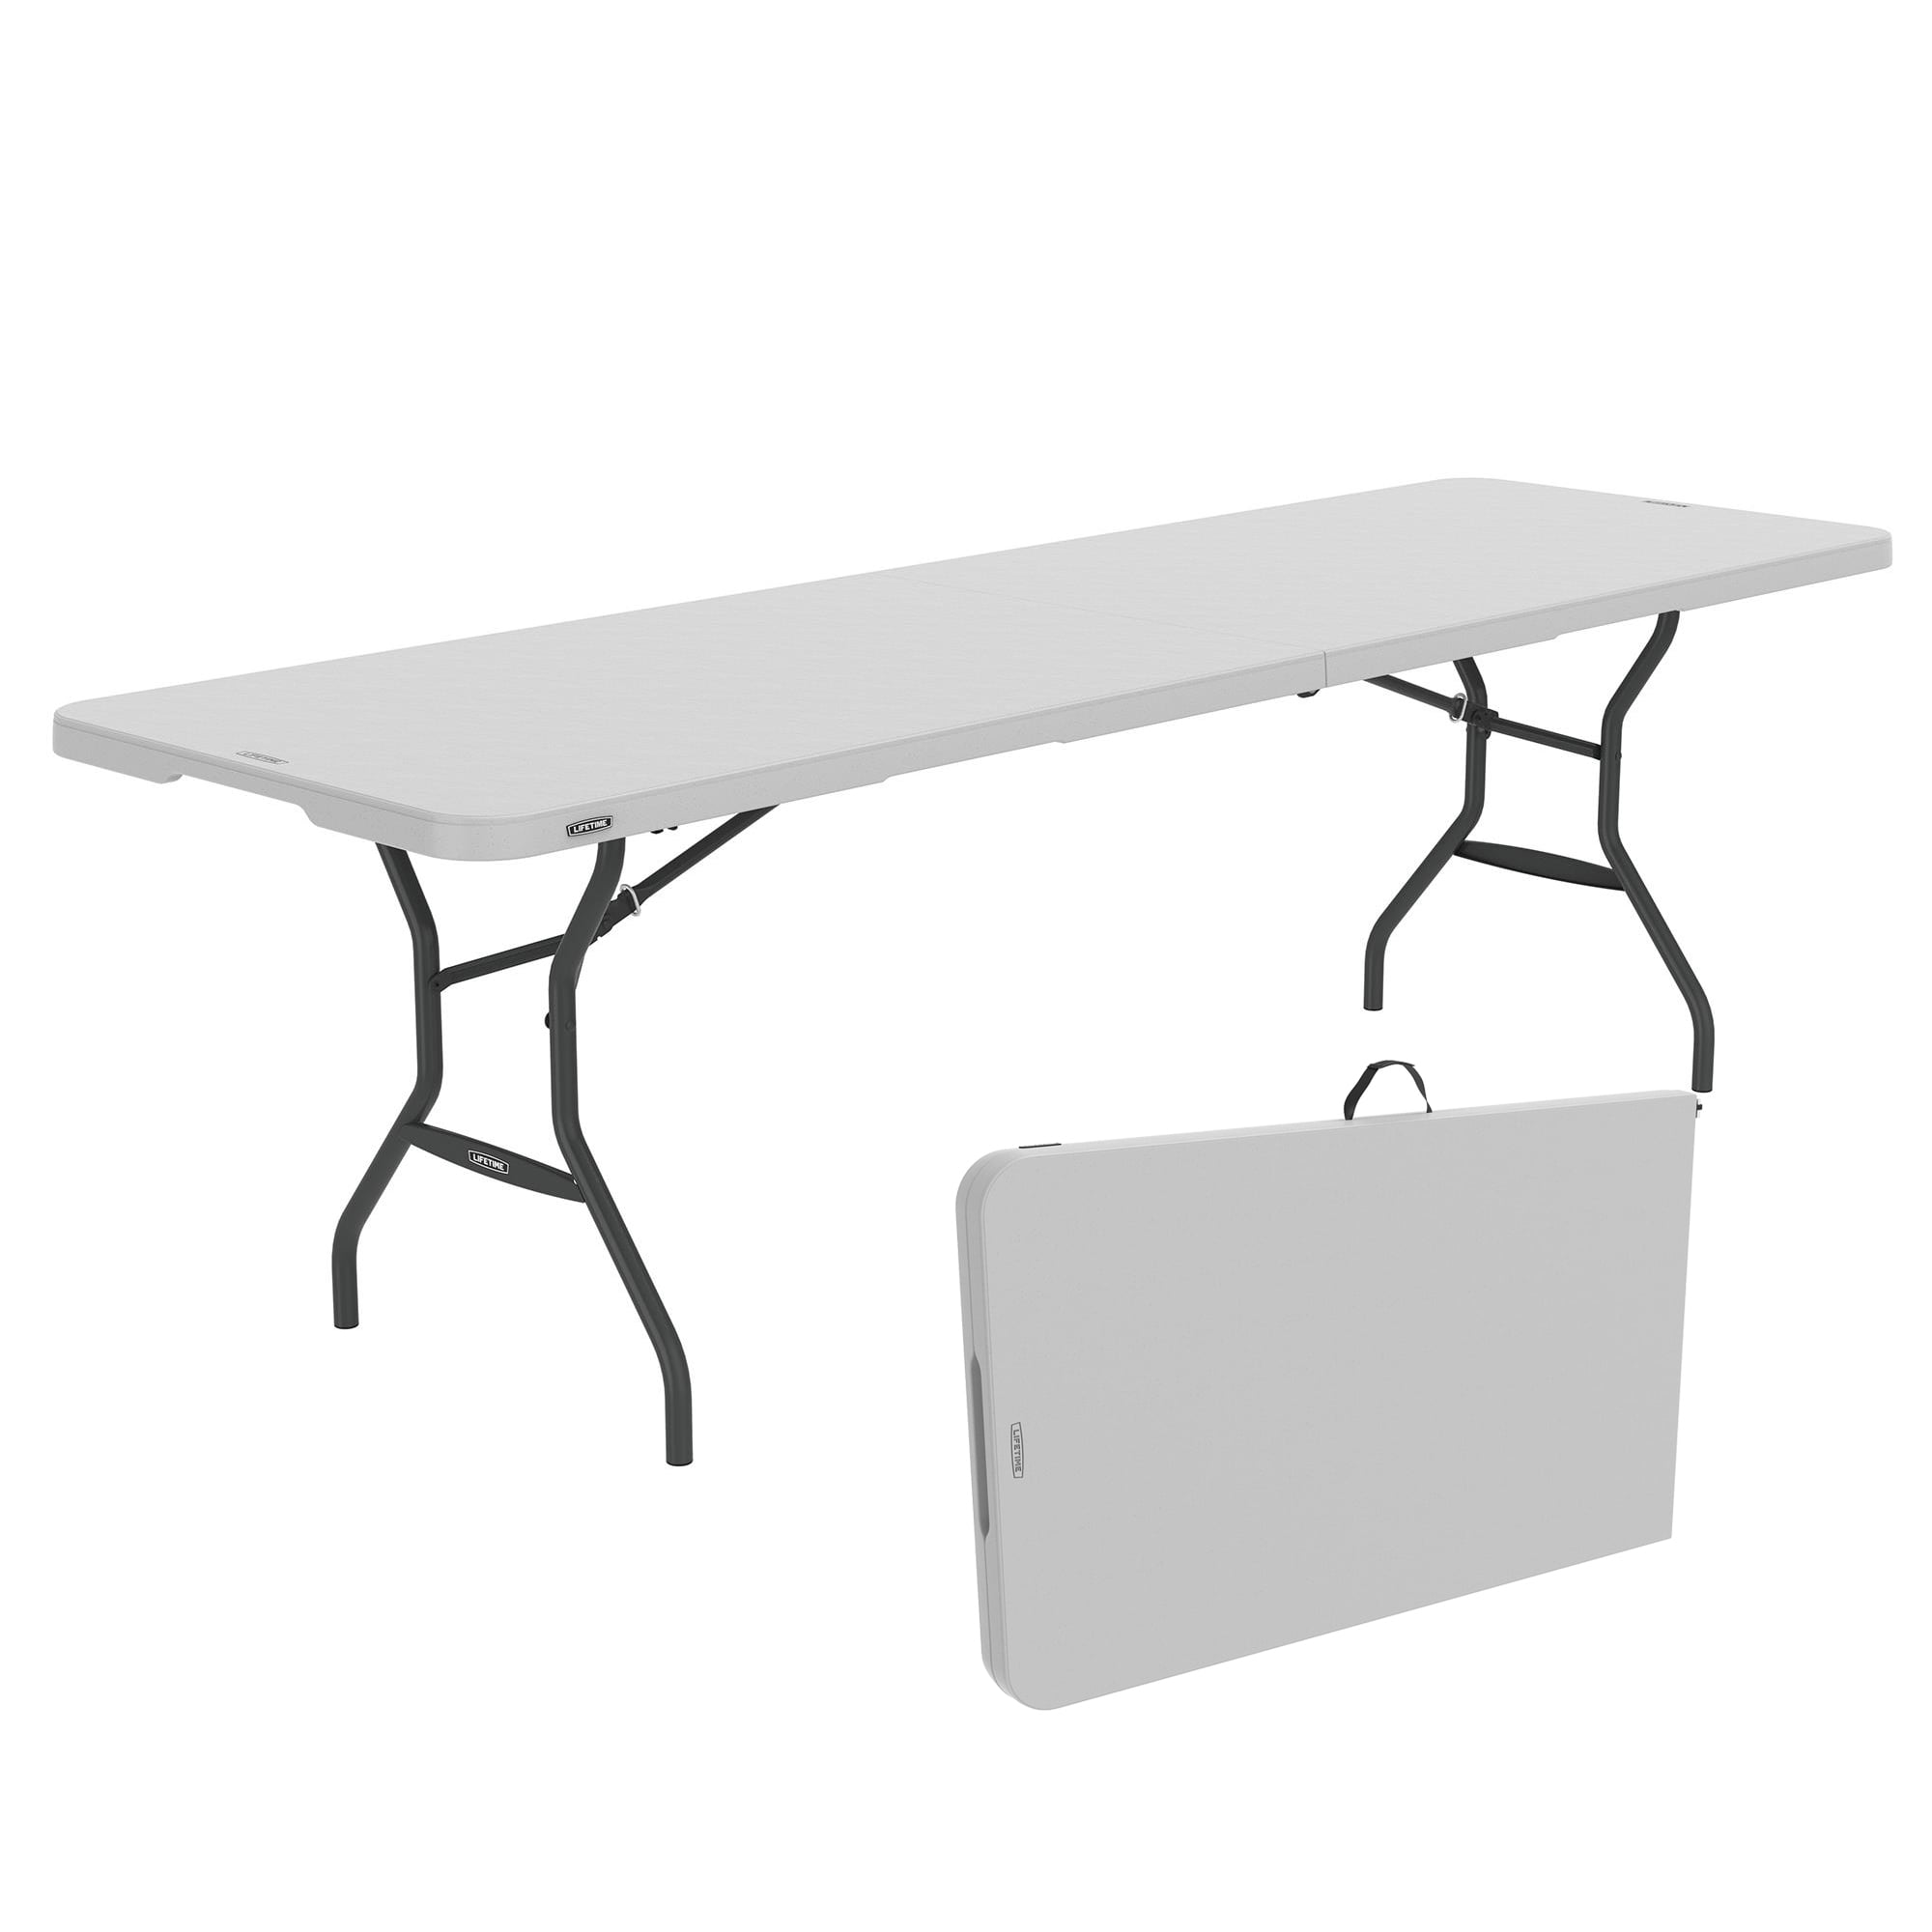 Lifetime 8 Foot Fold-in-Half Rectangle Table, Indoor/Outdoor Commercial  Grade, White Granite (280270)